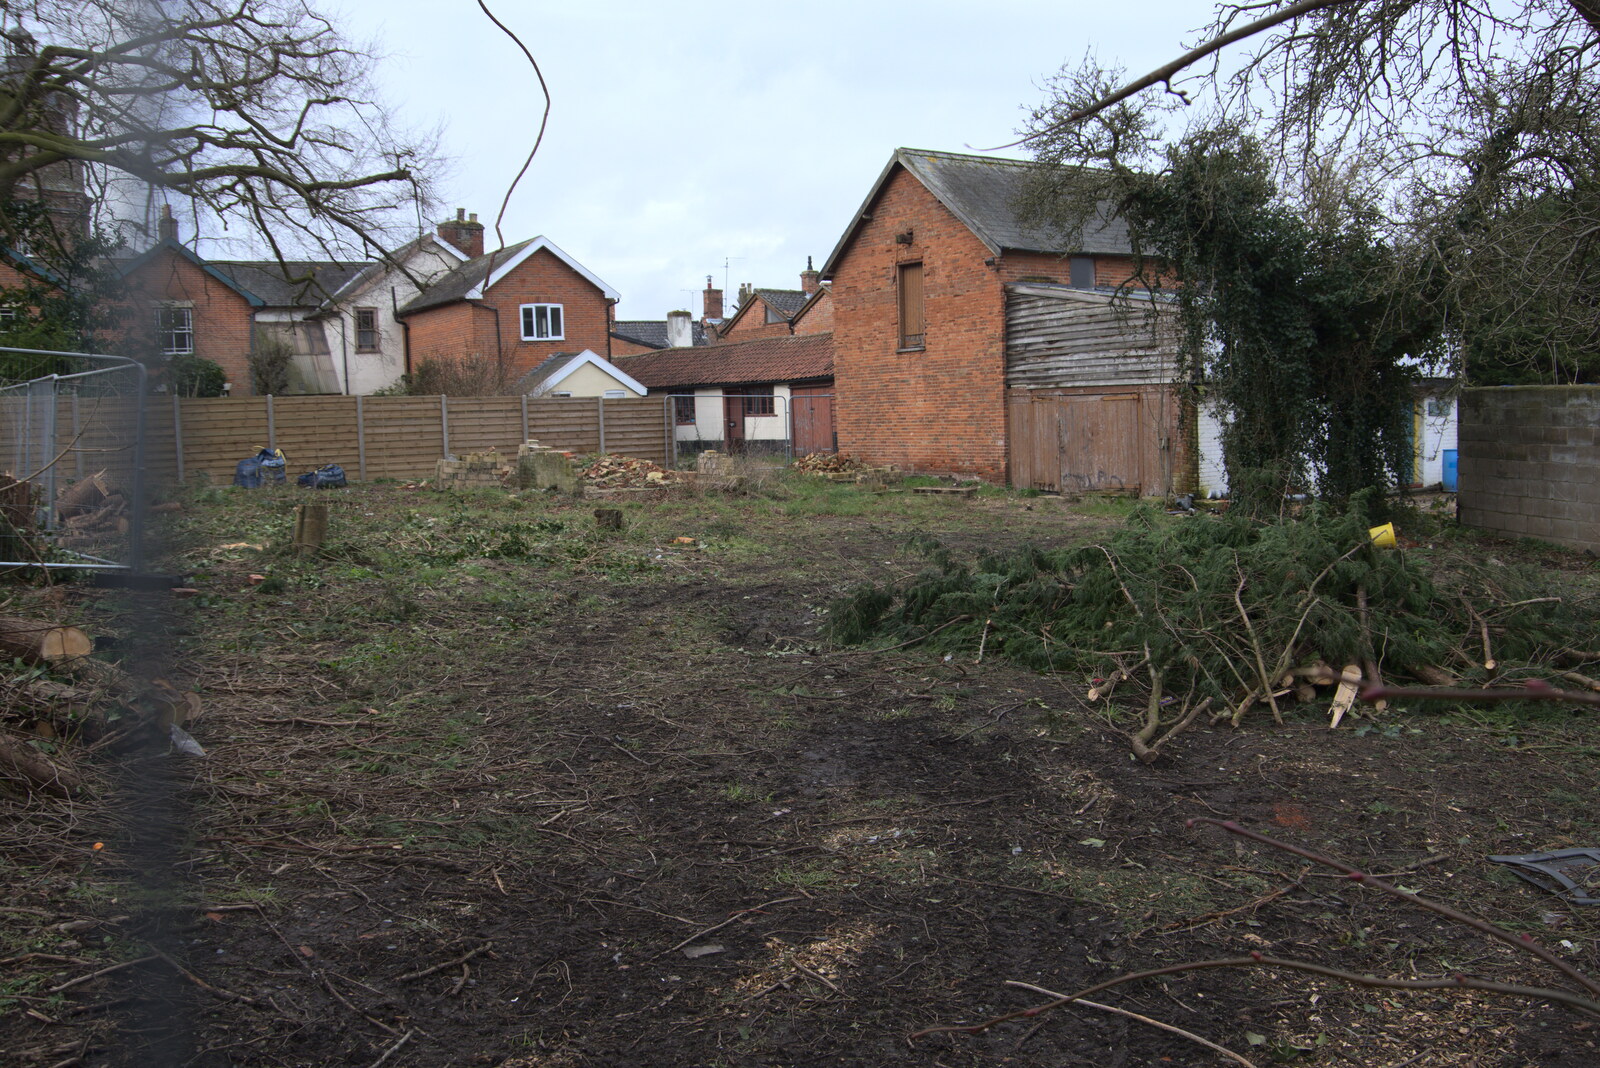 Another building plot is cleared on Dove Lane from The Old Sewage Works, The Avenue, Brome, Suffolk - 20th February 2021